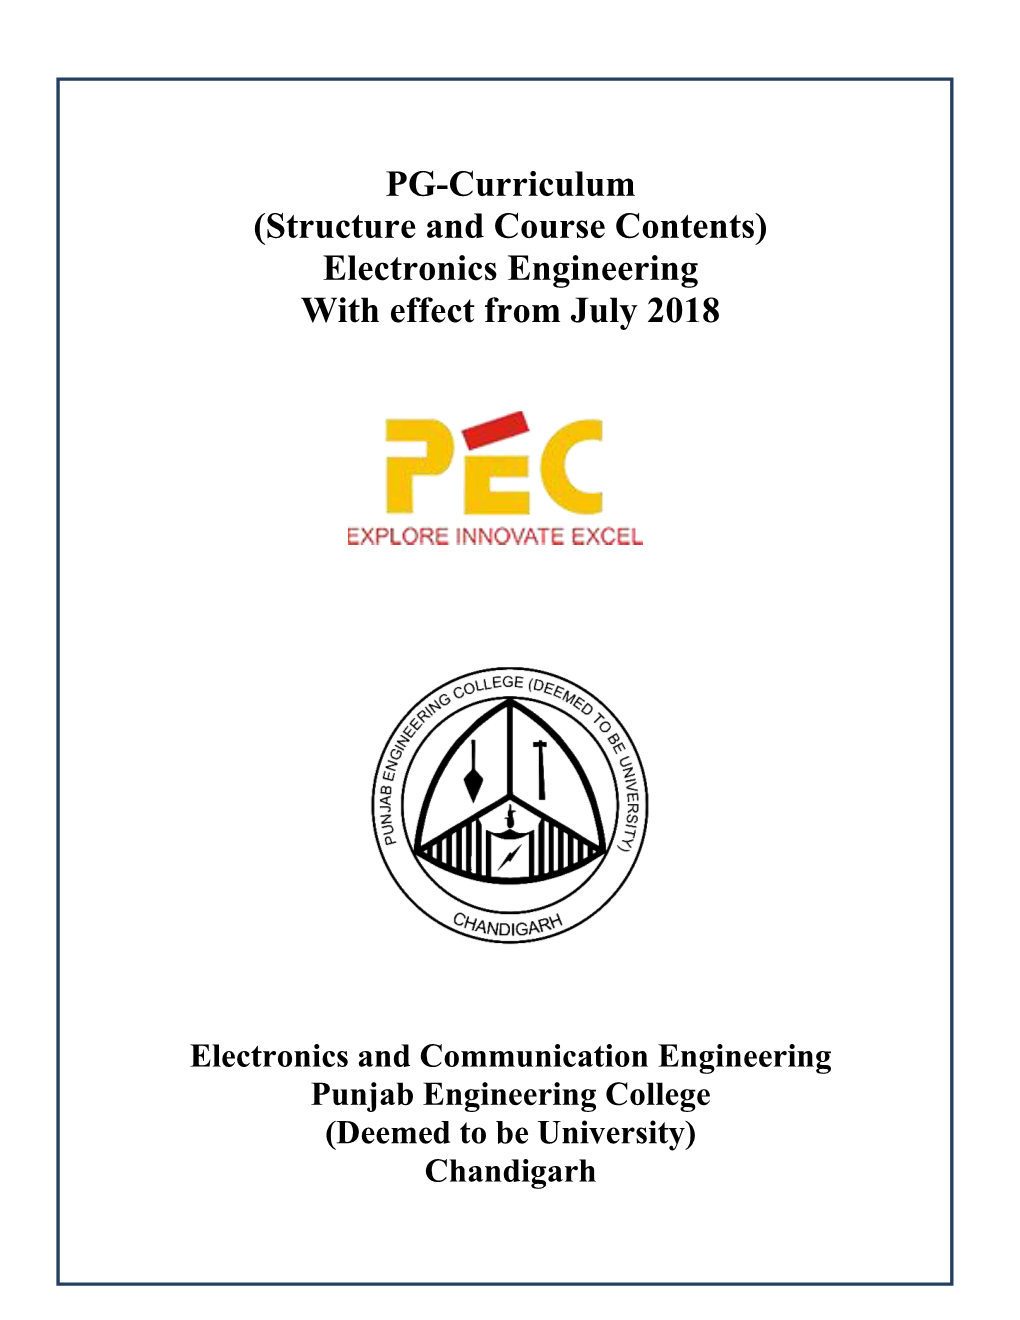 PG-Curriculum (Structure and Course Contents) Electronics Engineering with Effect from July 2018